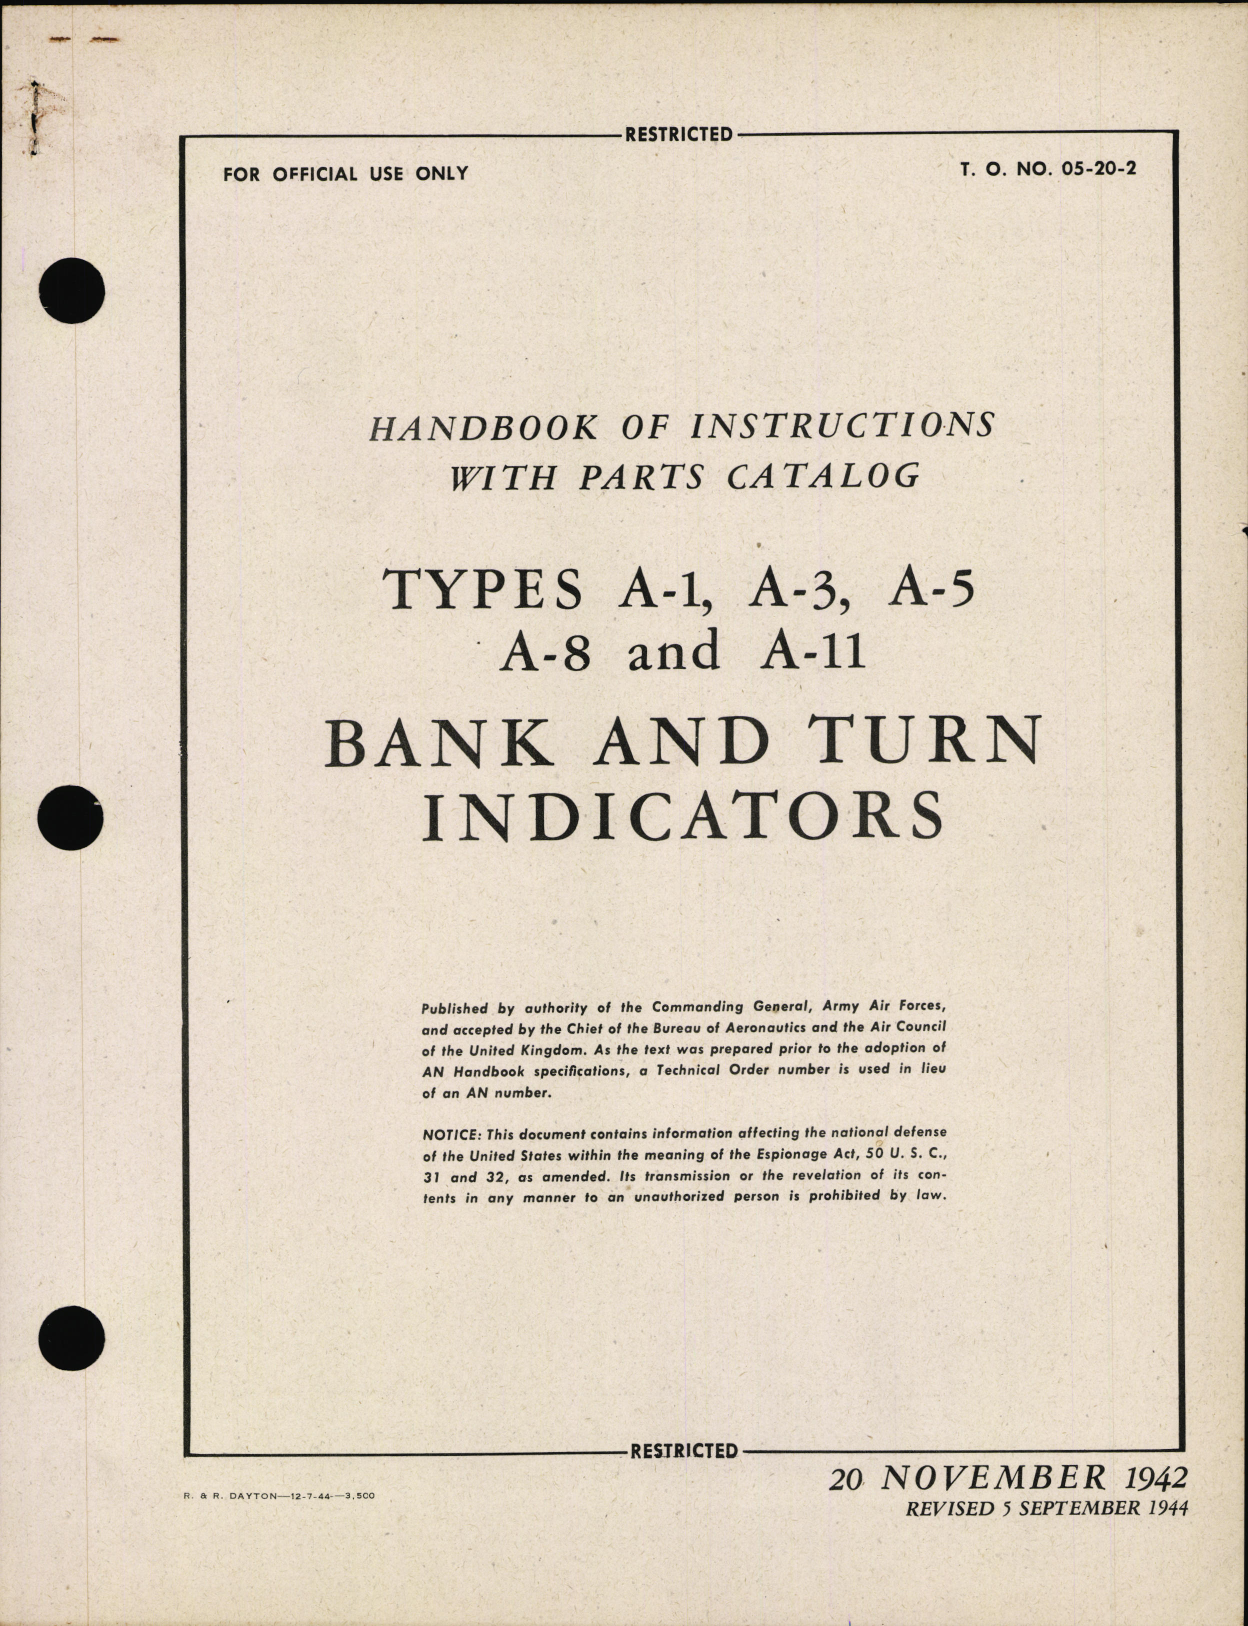 Sample page 1 from AirCorps Library document: Handbook of Instructions with Parts Catalog for Bank and Turn Indicators